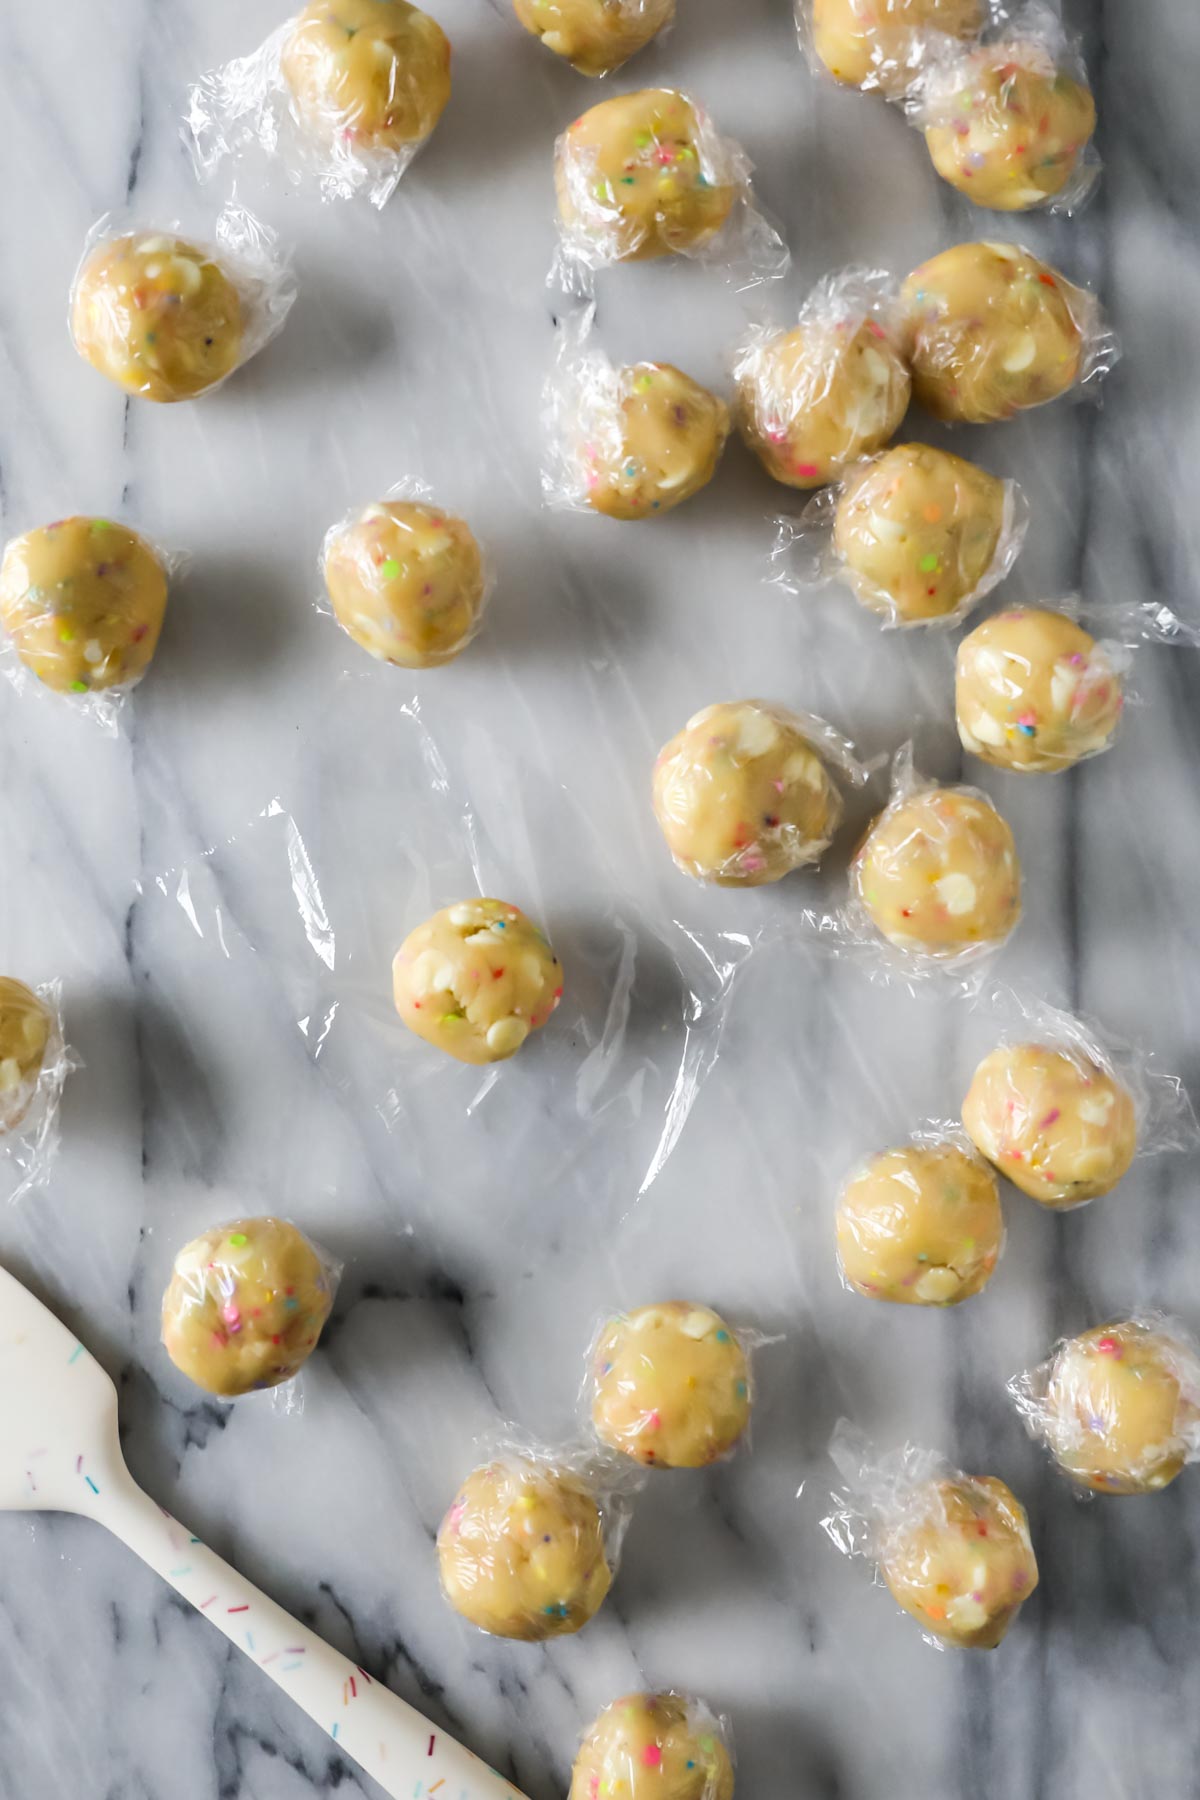 Cookie dough balls that have been wrapped in plastic in preparation for freezing.